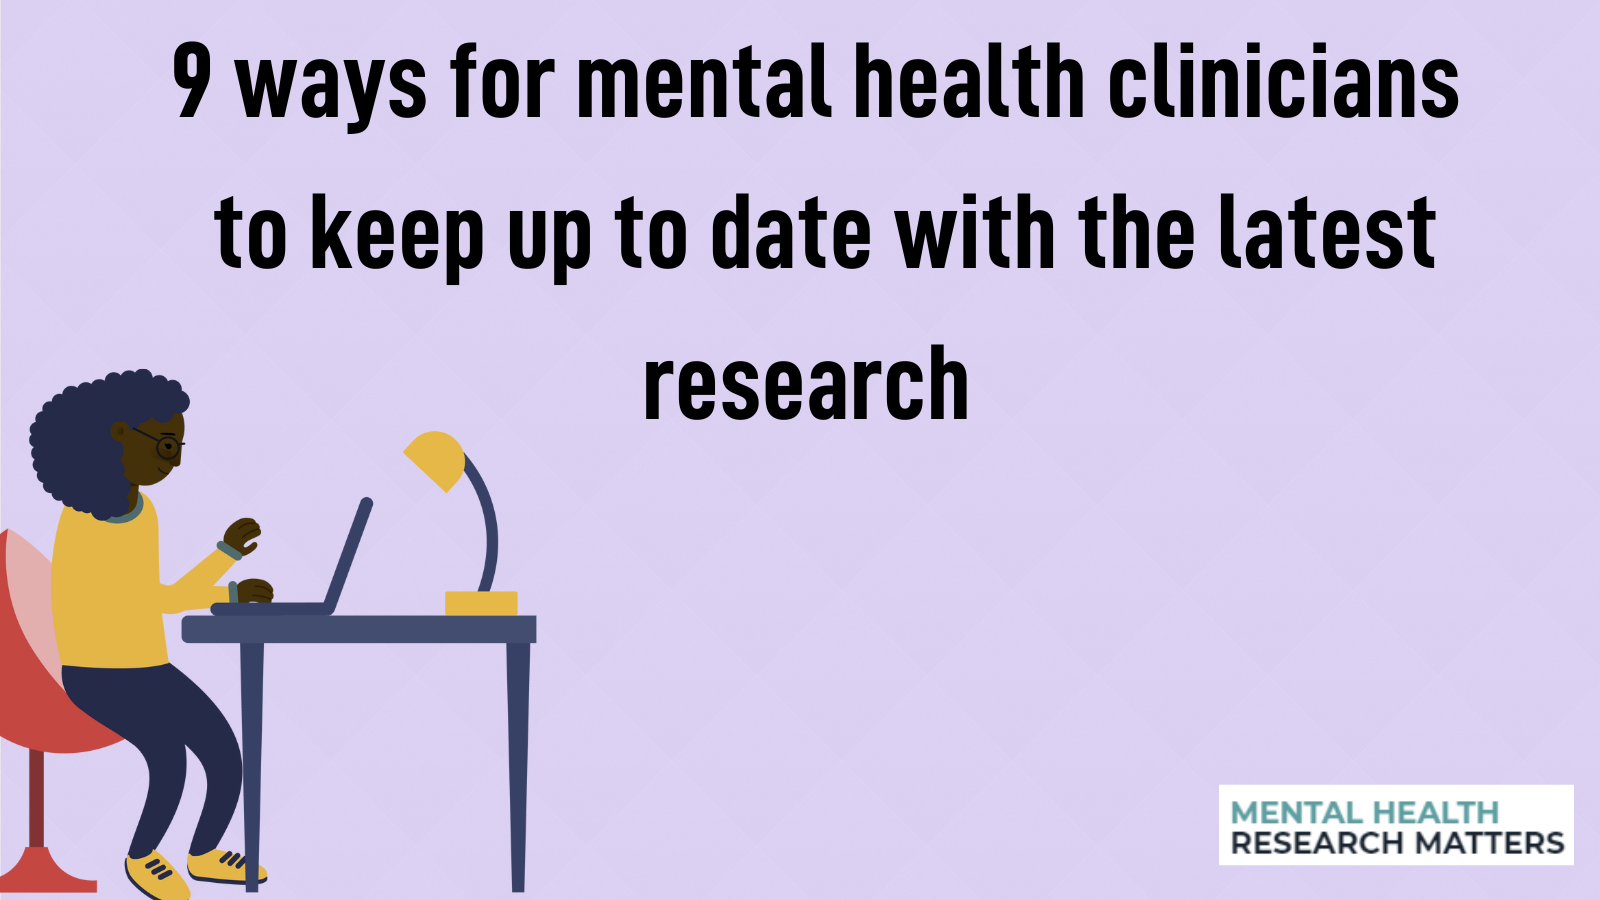 9 ways for mental health clinicians to keep up to date with the latest research